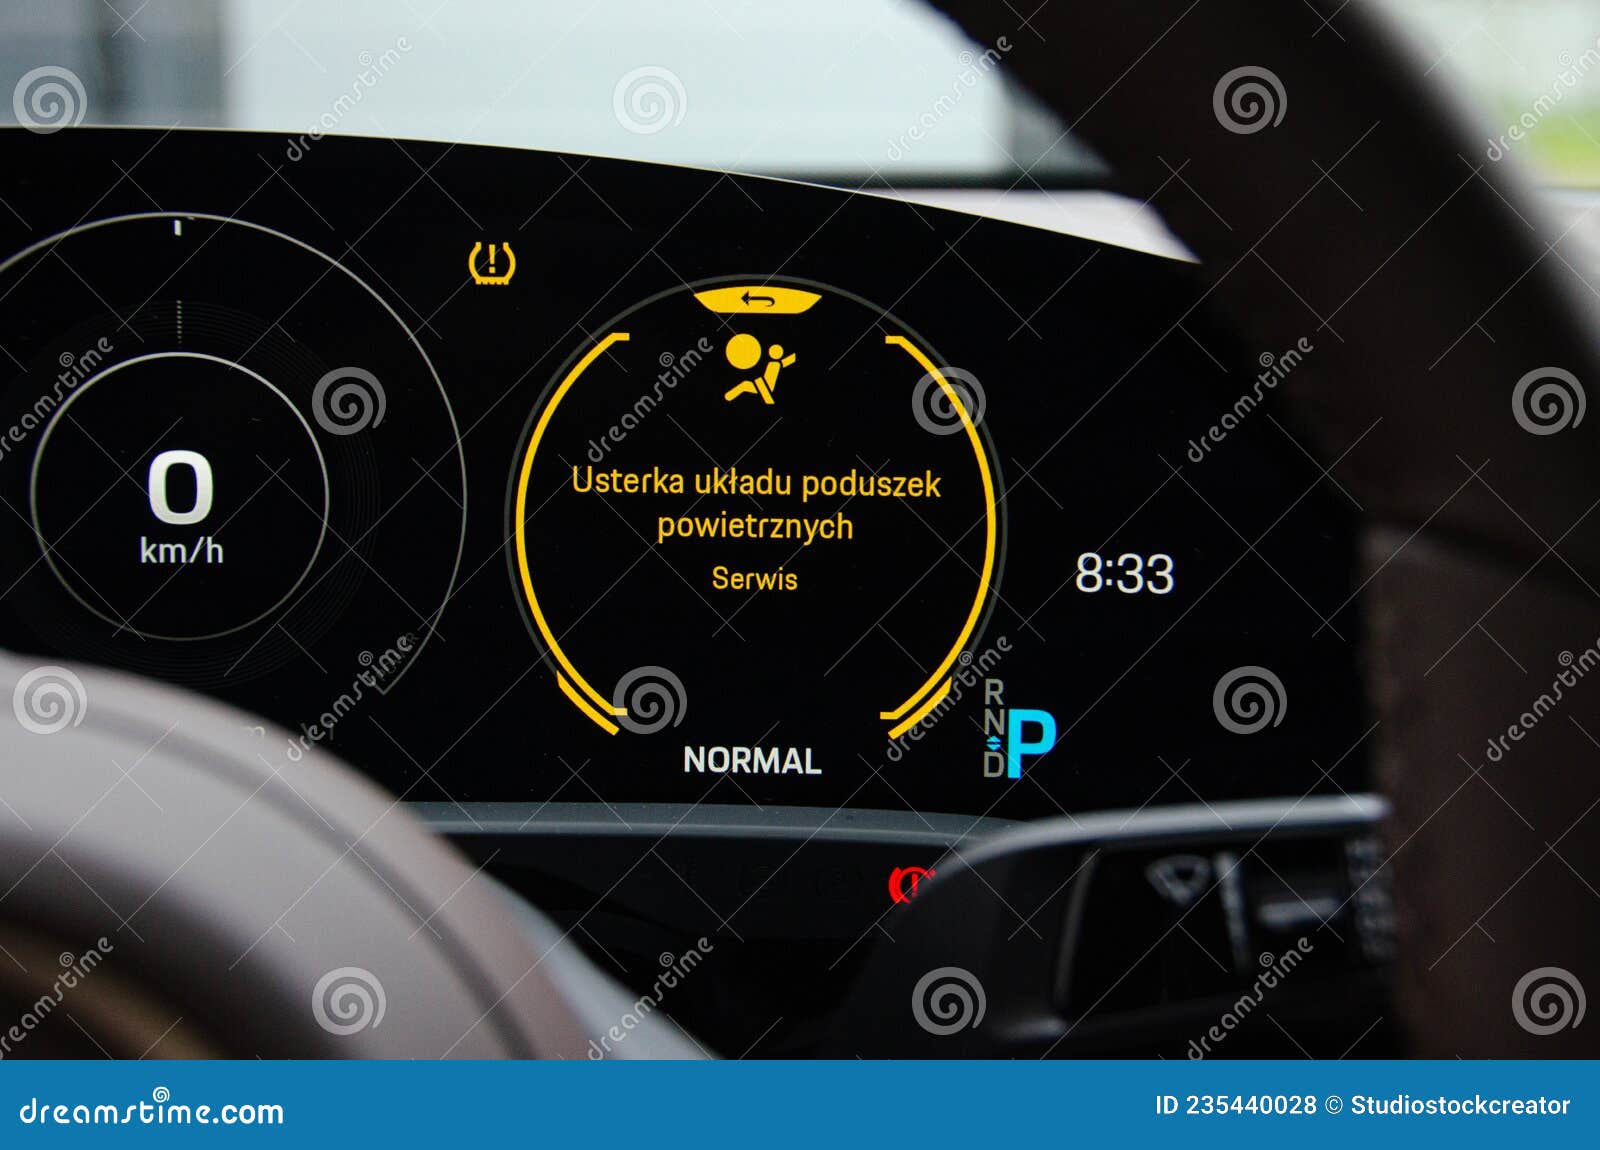 luxury elektric car dashboard with airbag warning light. car in car repair shop on computer diagnostic